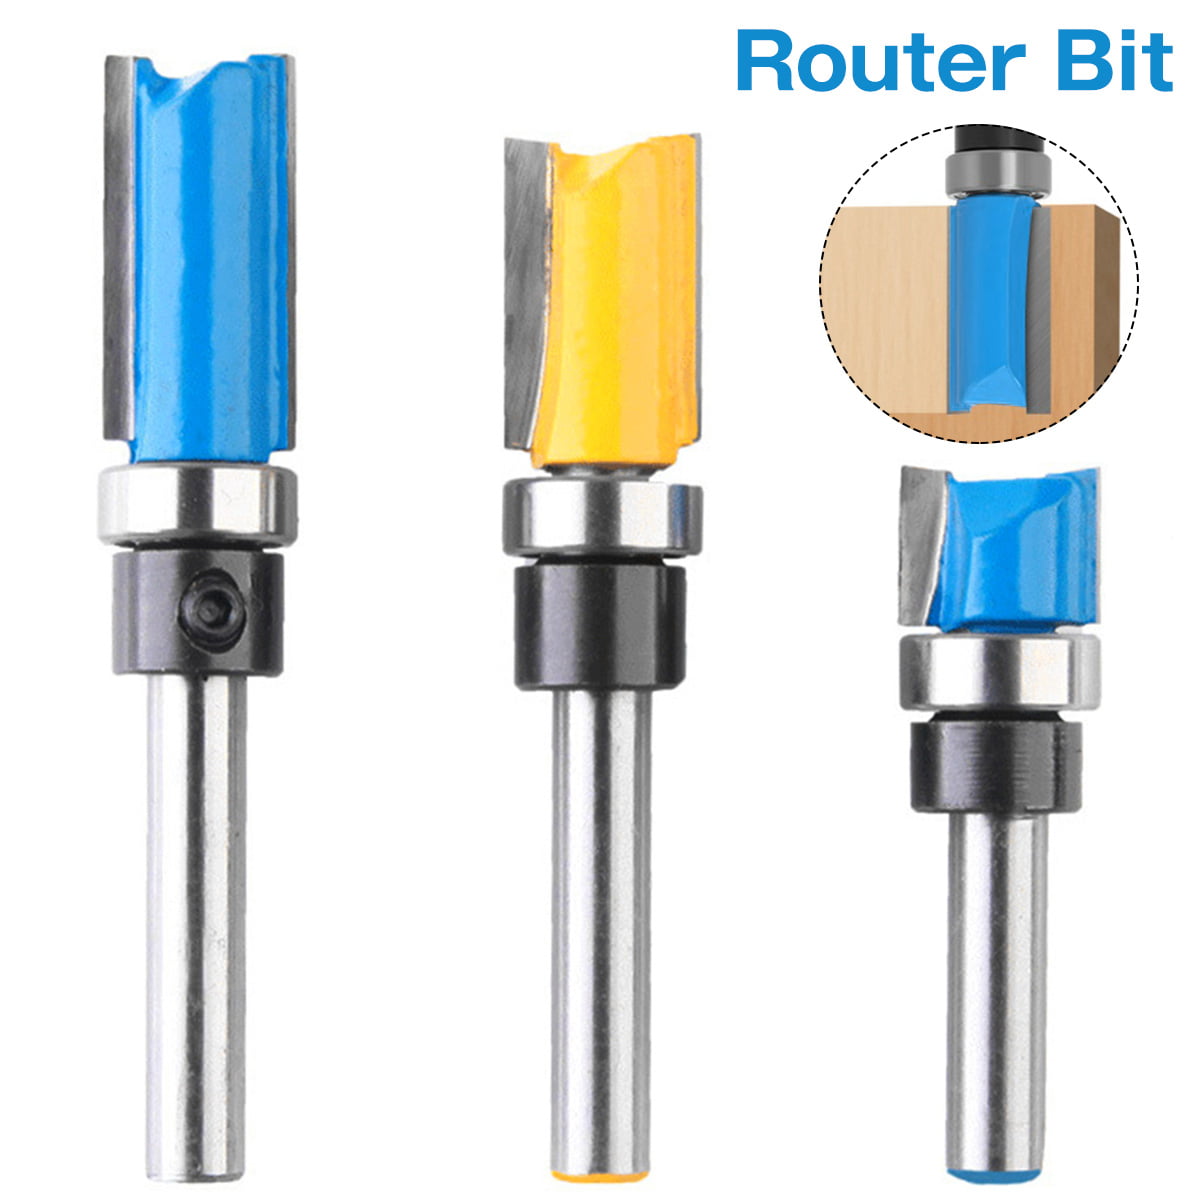 Woodworking Milling Cutter,Flush Trim Router Bit with 1/2 Inch Shank Woodworking Tool 